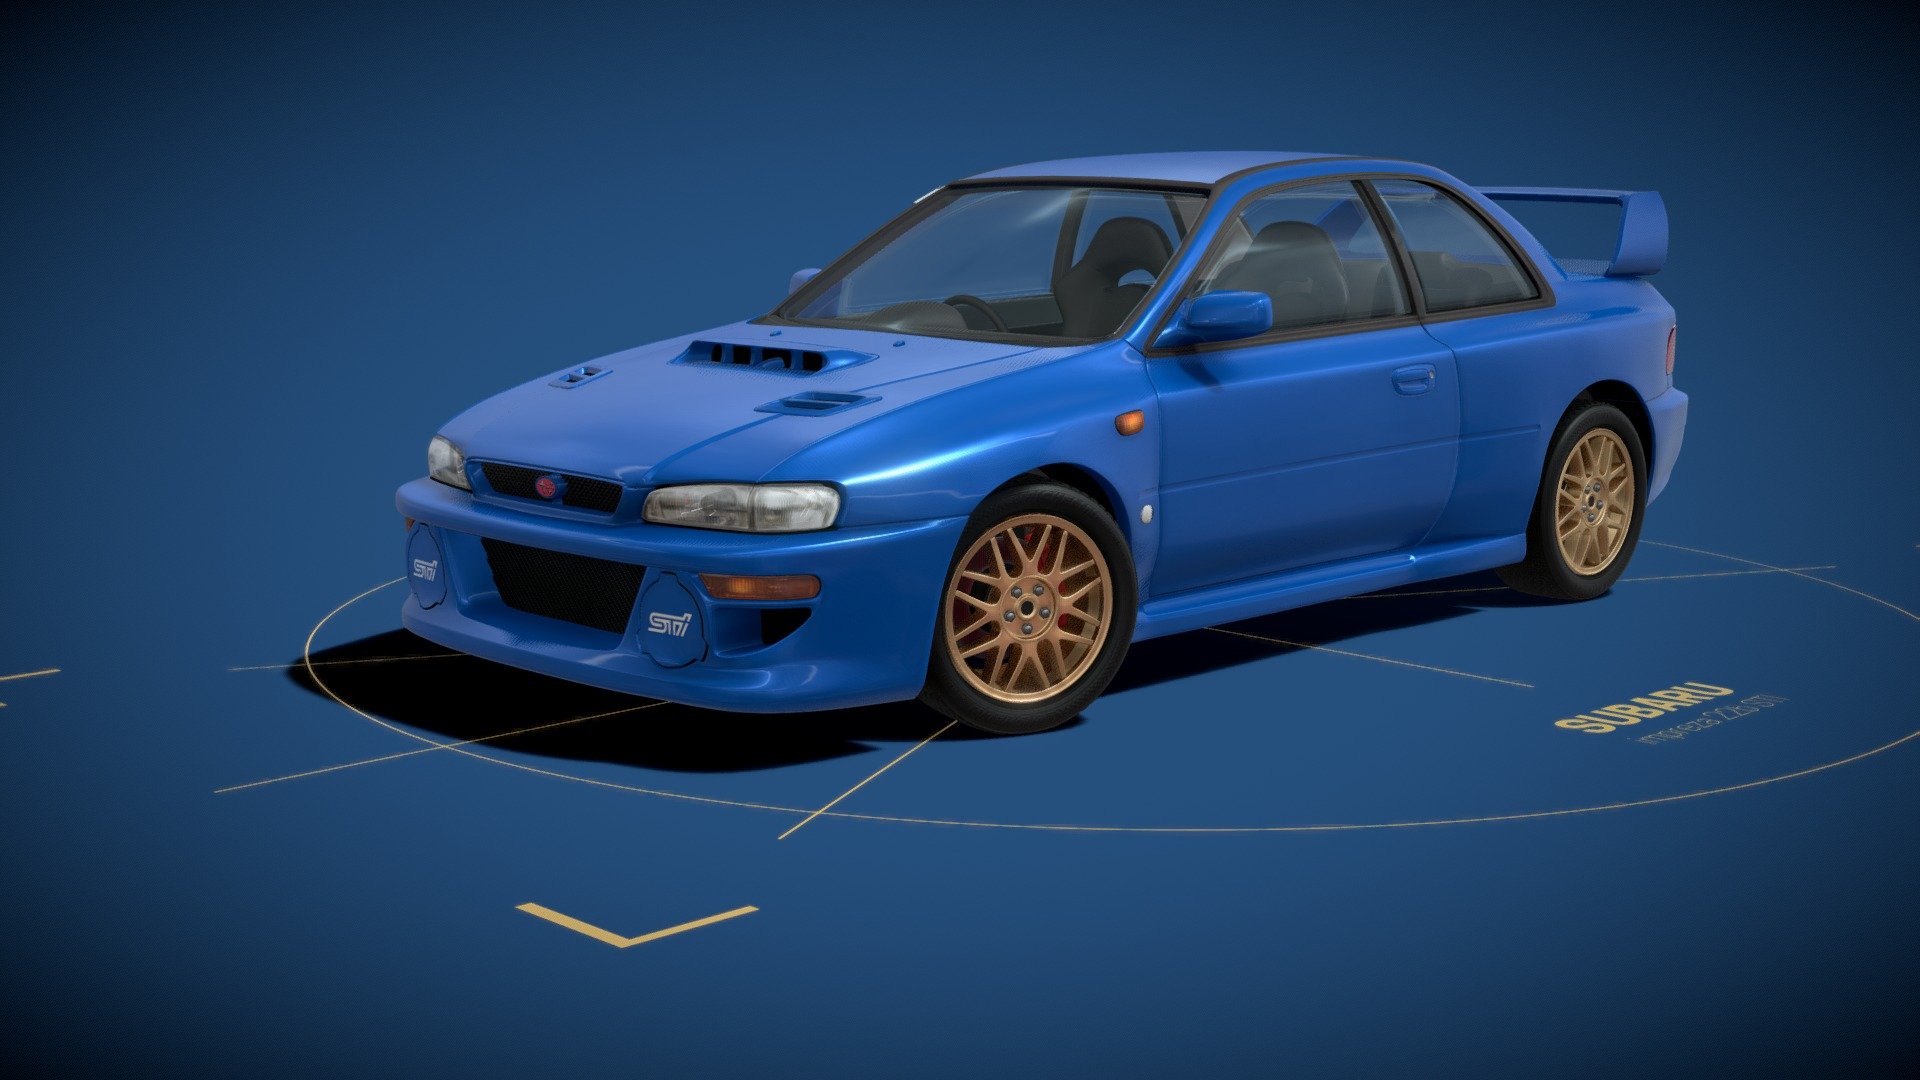 SUBARU Impreza 22b STI.
A car model specialy created for 3d print. Model is separated to parts, closed solids, with exact gaps and tolerances to perfectly match together. Recommended scale is 1:43 for SLA technology 3D printers. 

Or, just use 3D model assembly with materials and textures wherever you want 3d model